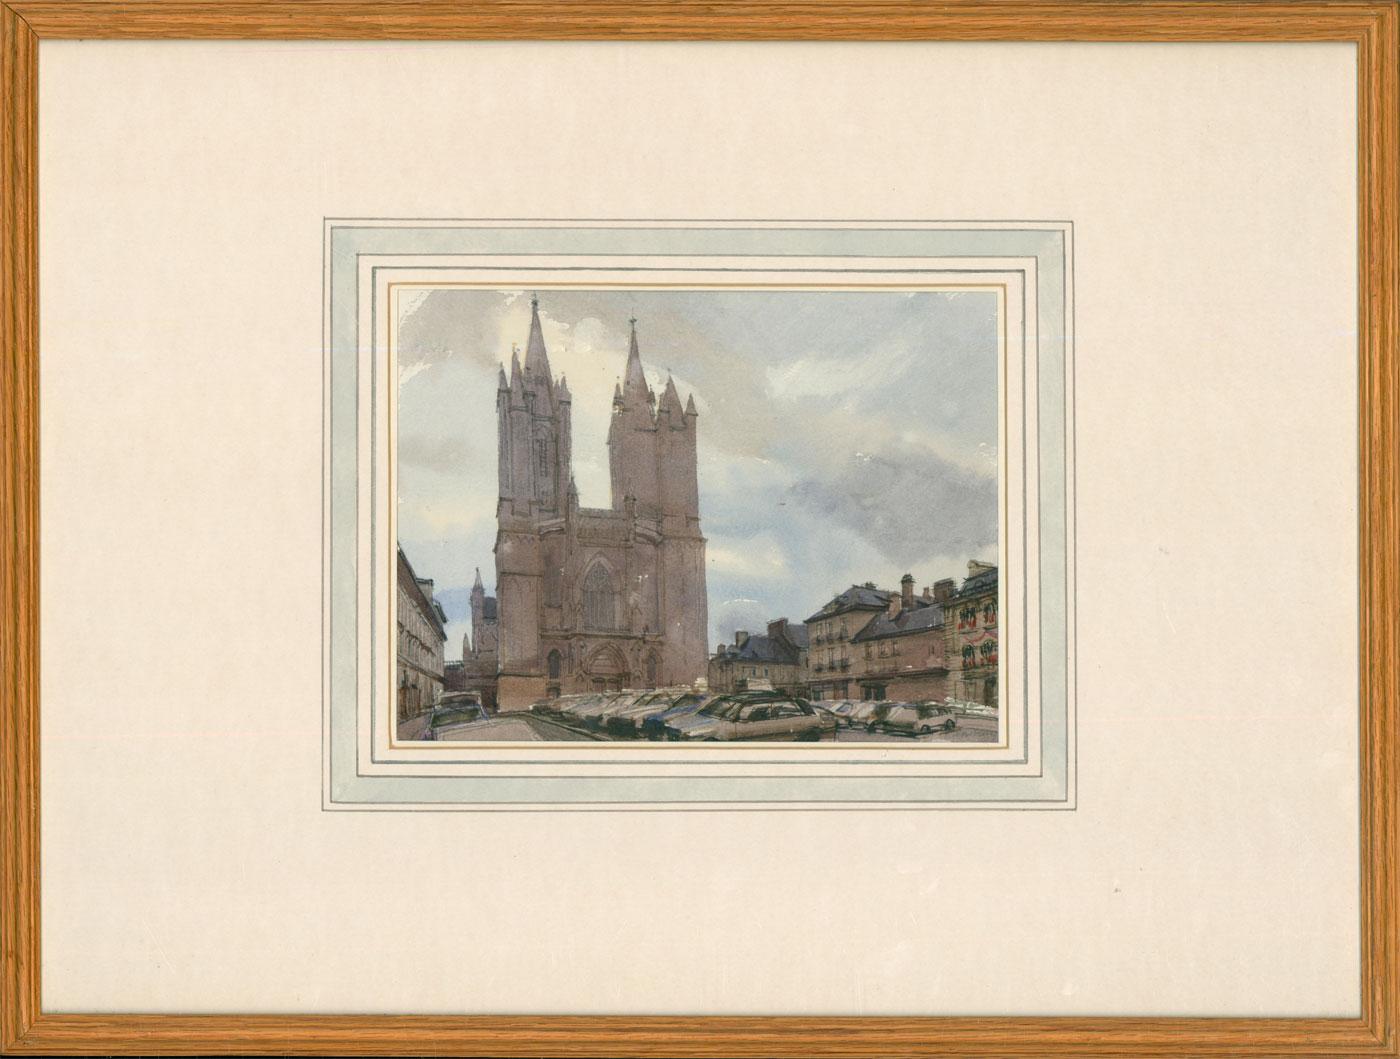 A striking perspective study of Coutances Cathedral, painted in watercolours by the British artist John Newberry (b.1934). Signed in graphite to the lower right. Presented in a narrow oak frame with wash-line mount. On watercolour paper. 
